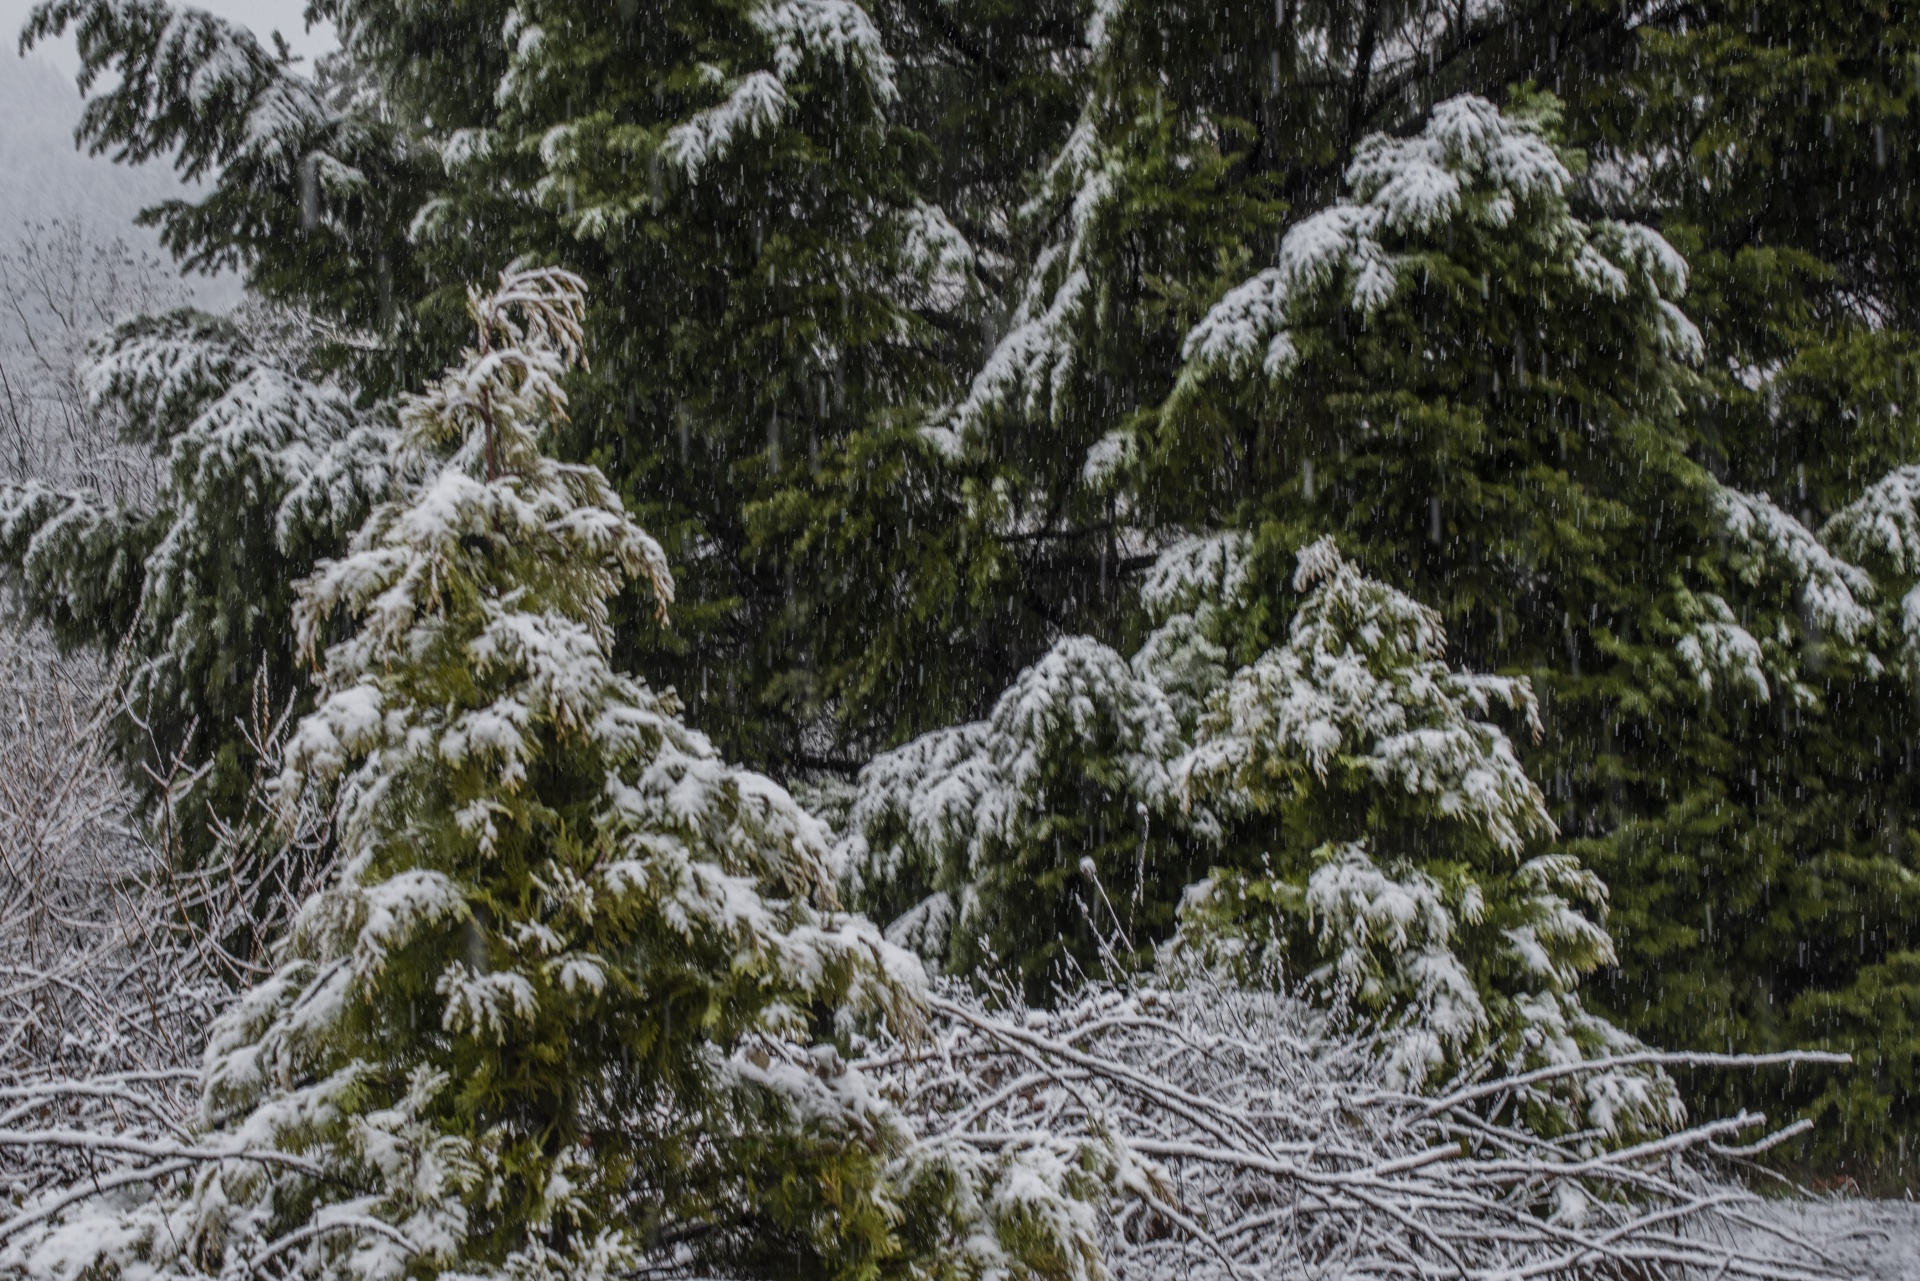 Snowing With Pine Trees